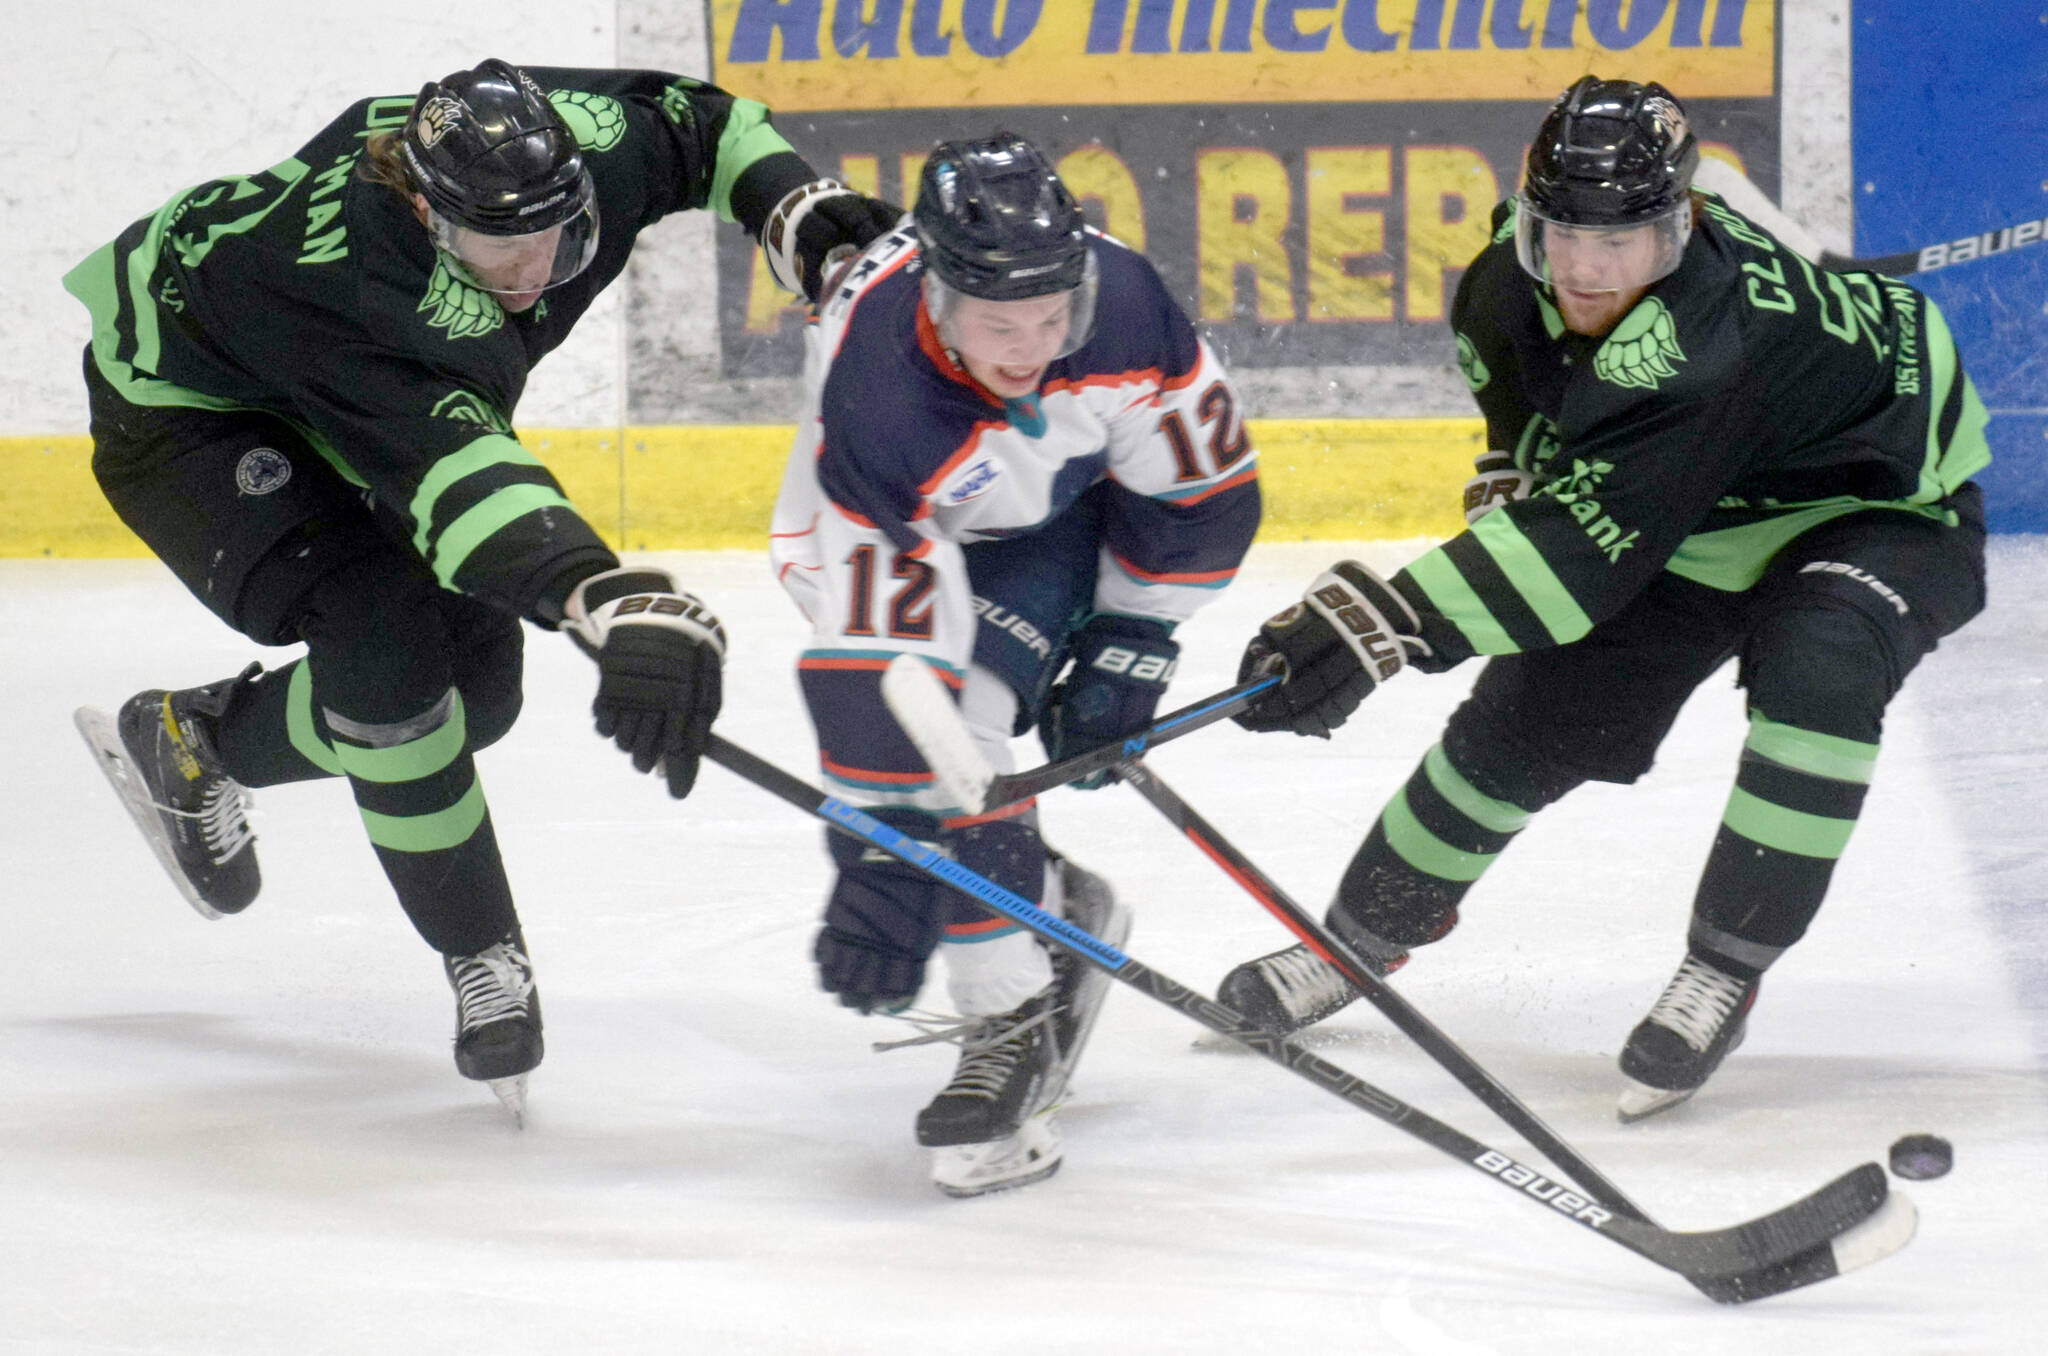 Caleb Huffman and Carter Cloutier of the Kenai River Brown Bears battle Jackson Reineke of the Anchorage Wolverines for the puck Friday, Feb. 18, 2022, at the Soldotna Regional Sports Complex in Soldotna, Alaska. (Photo by Camille Botello/Peninsula Clarion)